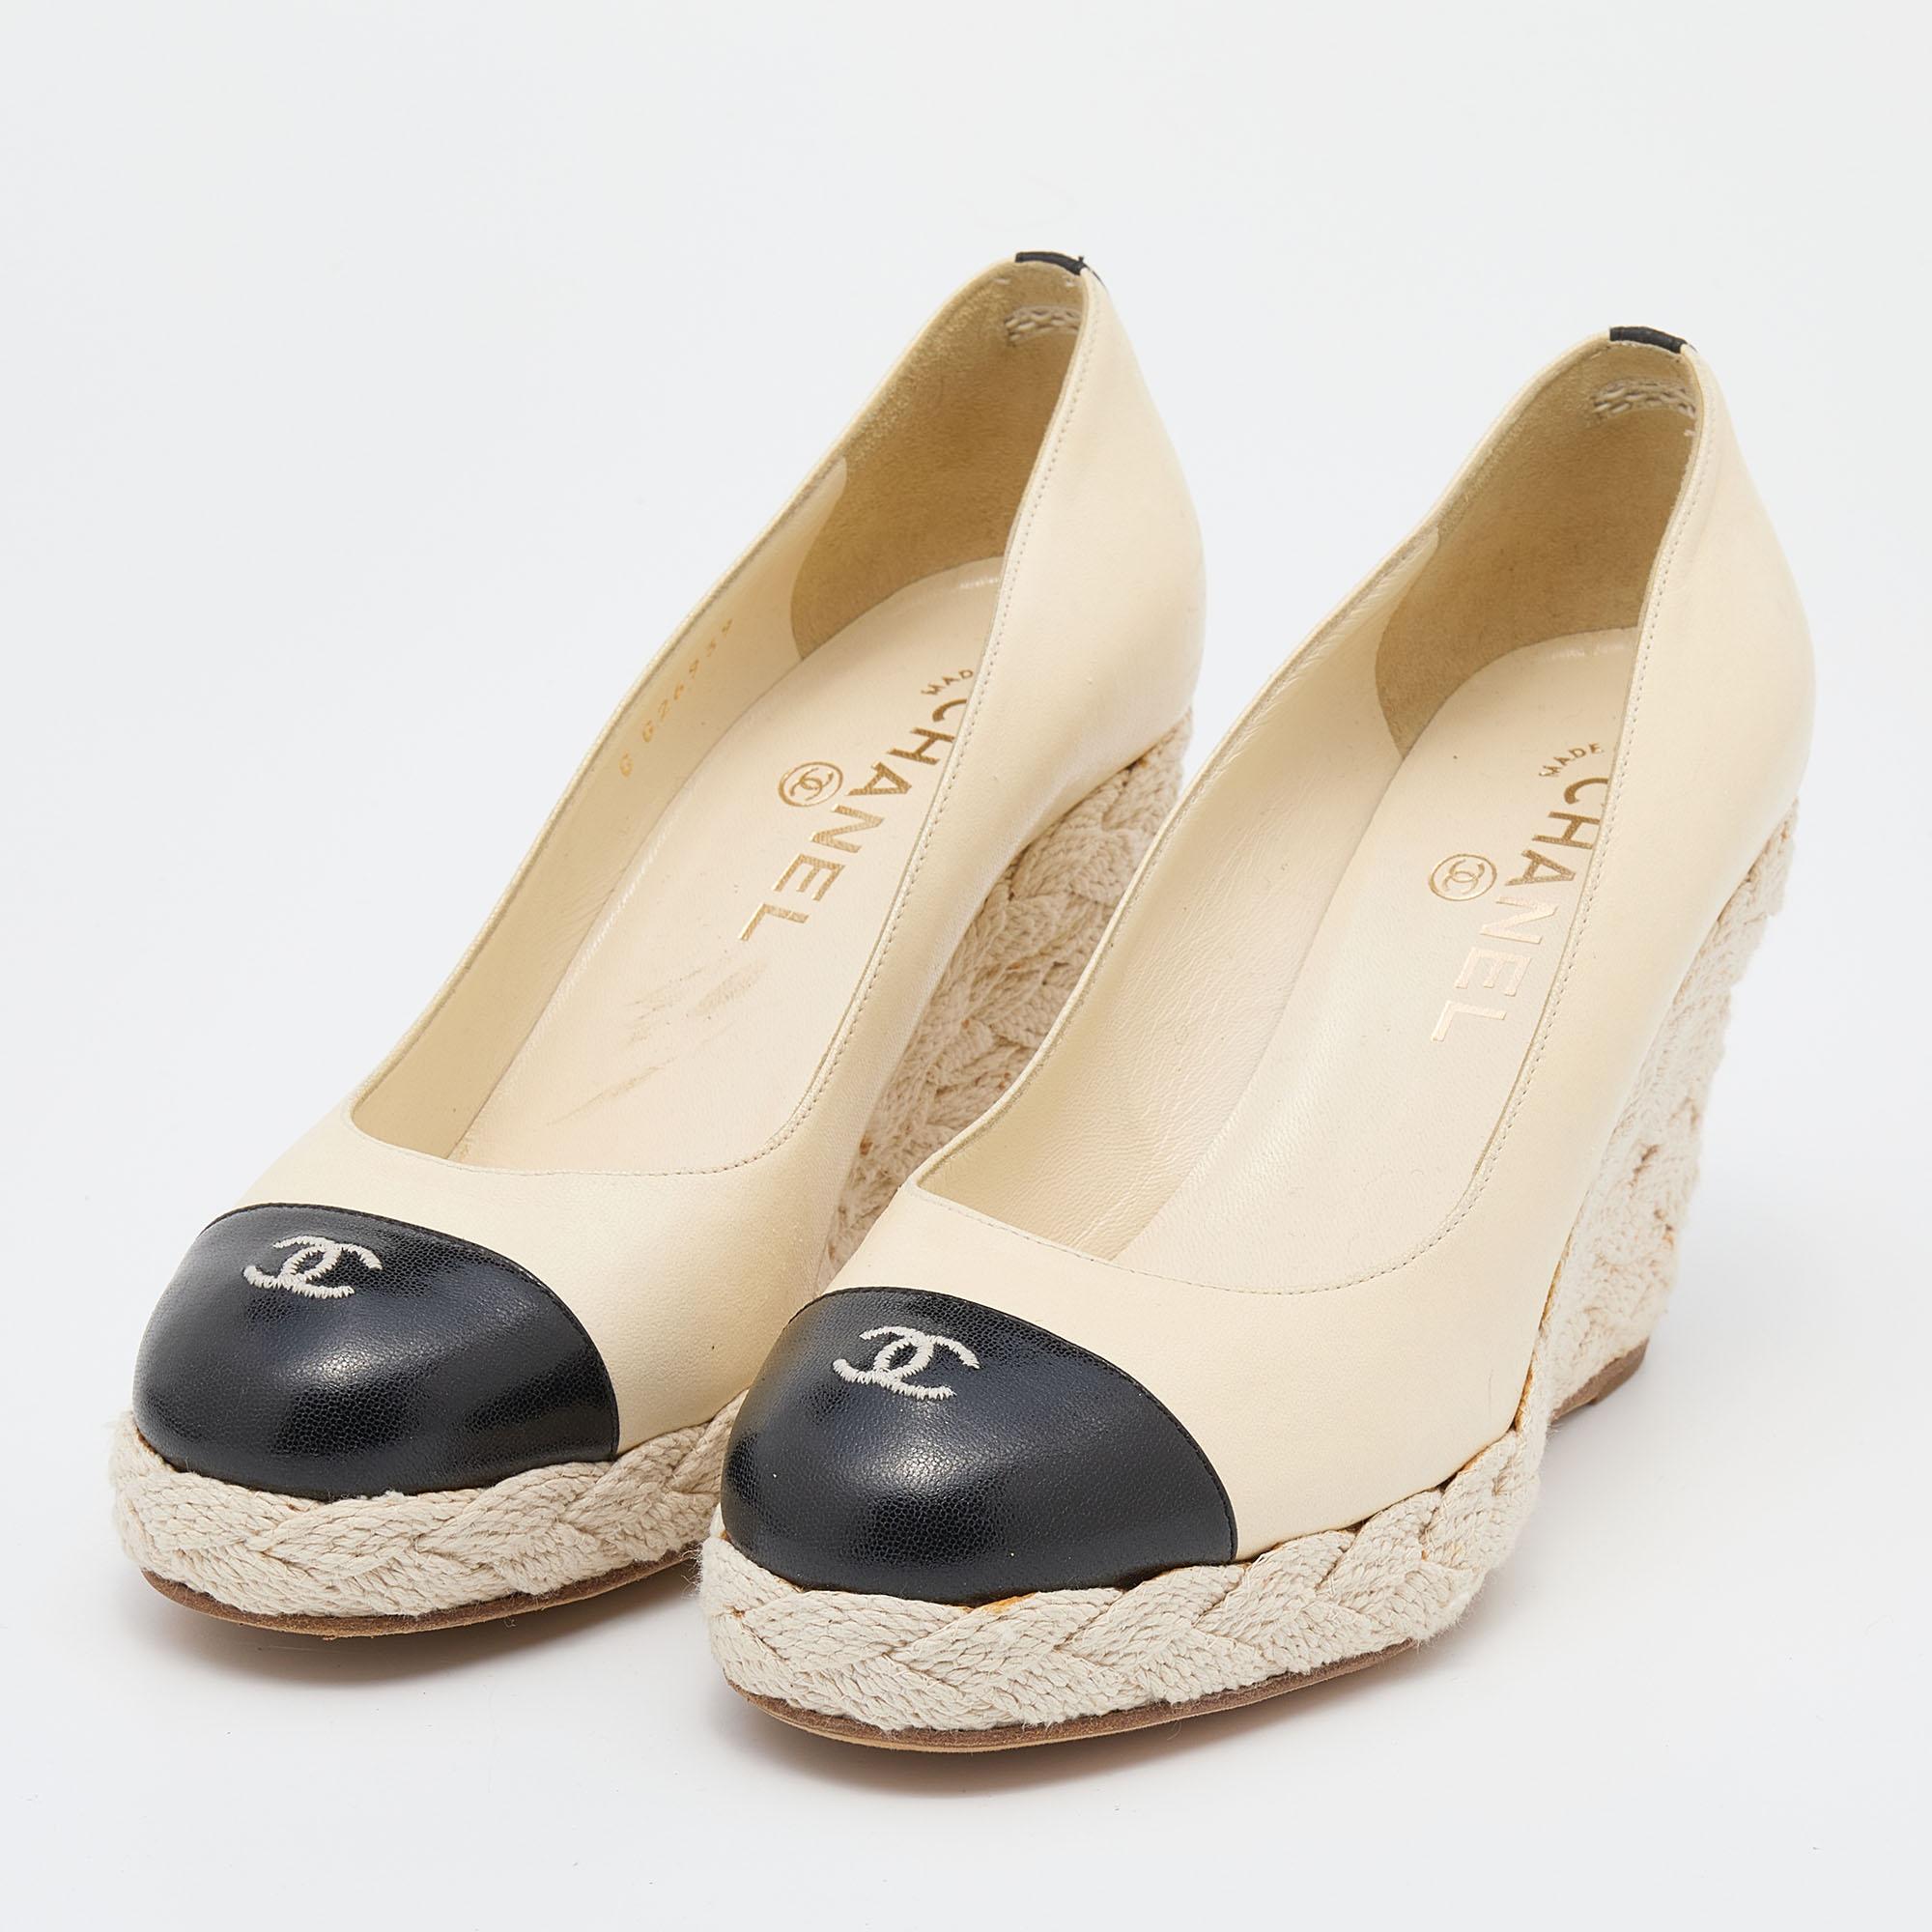 The usage of black and cream shade offers this pair of Chanel pumps an elegant contrast. Constructed from leather, it features espadrille trims, a 'CC' motif on the cap toes, and wedge heels.